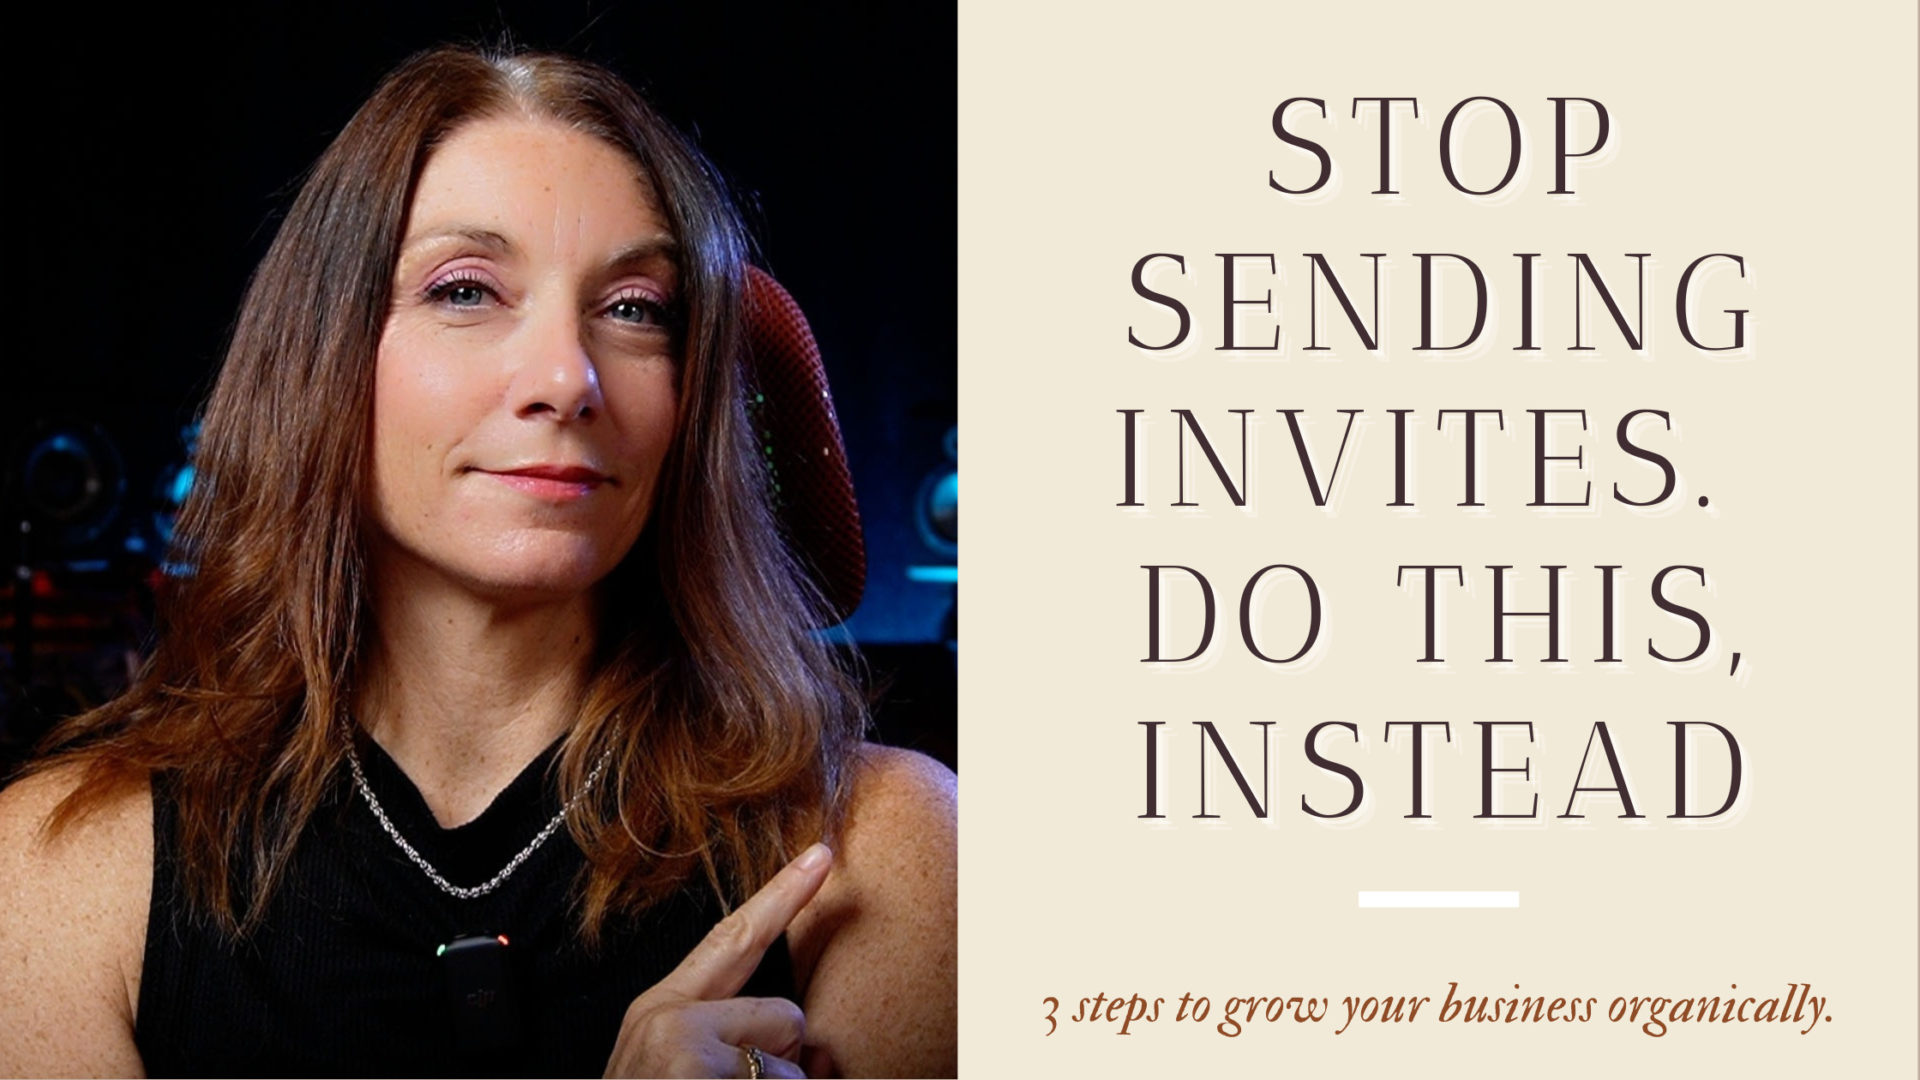 STOP SENDING INVITATIONS FOR YOUR NETWORK MARKETING